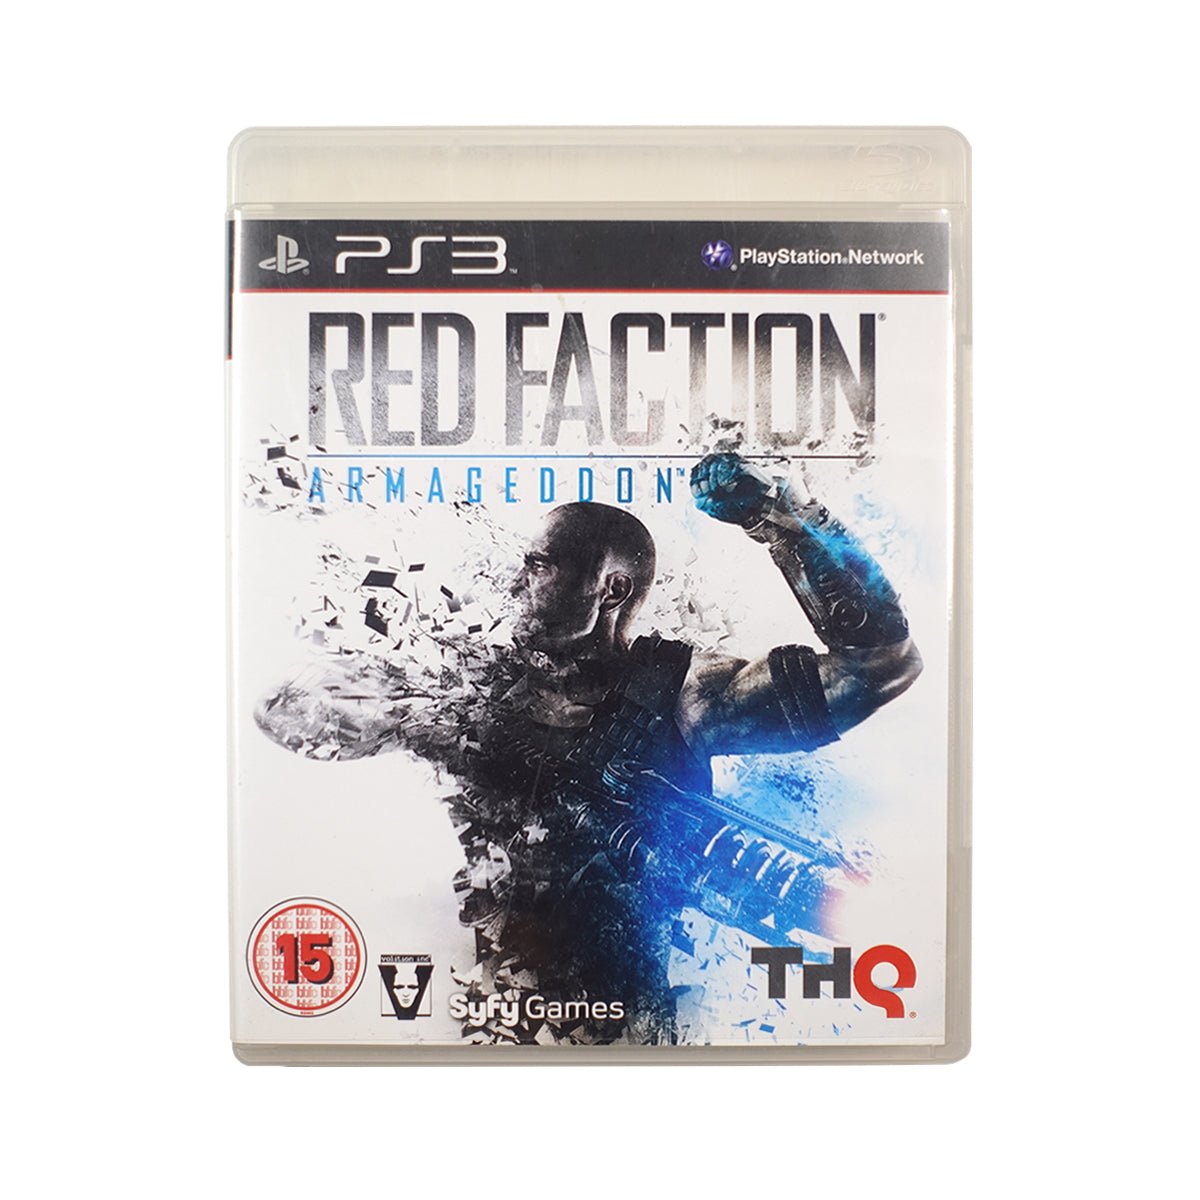 (Pre-Owned) Red Faction : Armagedon - PS3 - Store 974 | ستور ٩٧٤